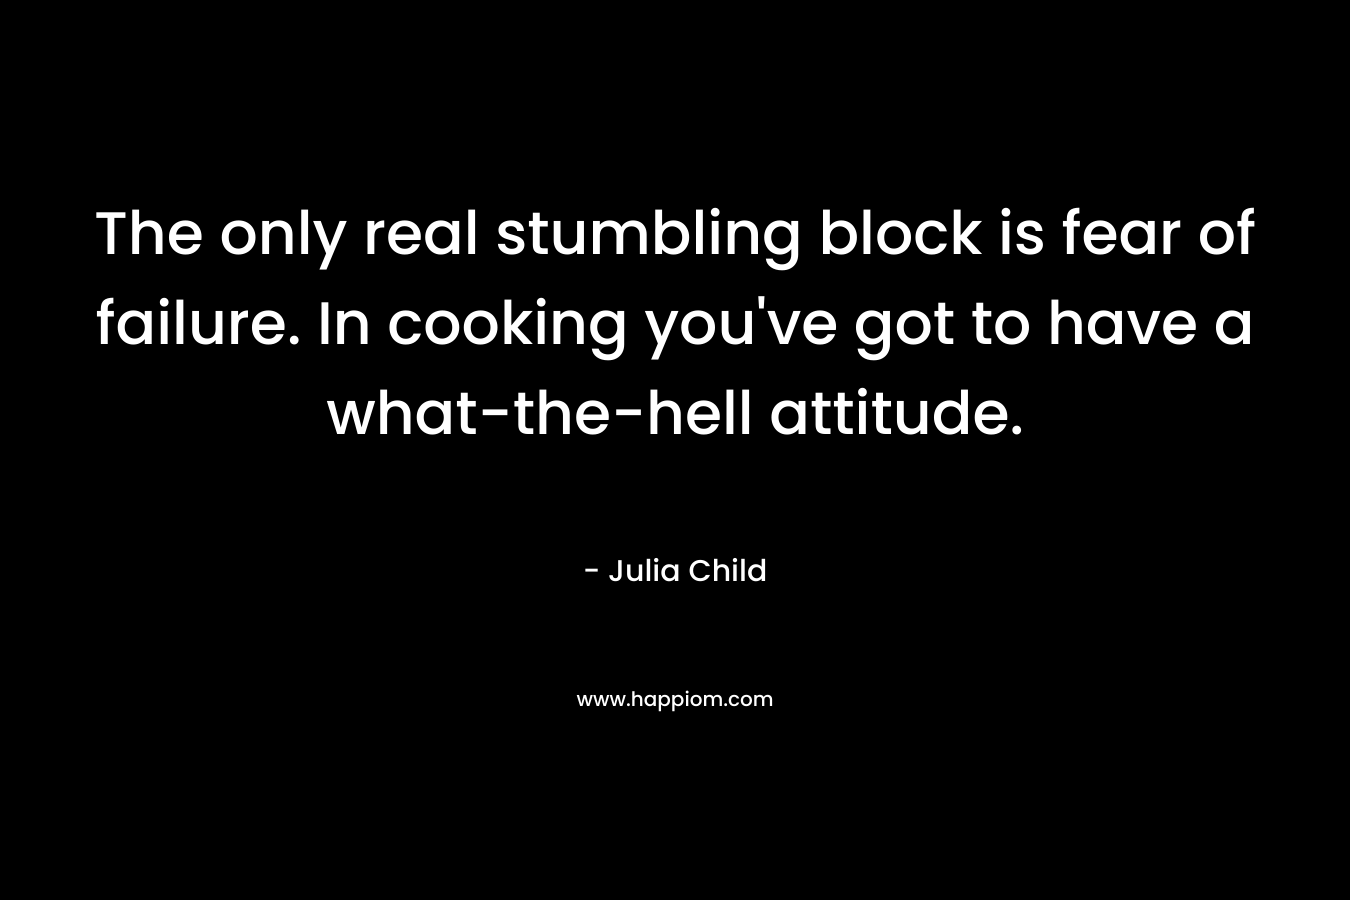 The only real stumbling block is fear of failure. In cooking you’ve got to have a what-the-hell attitude. – Julia Child